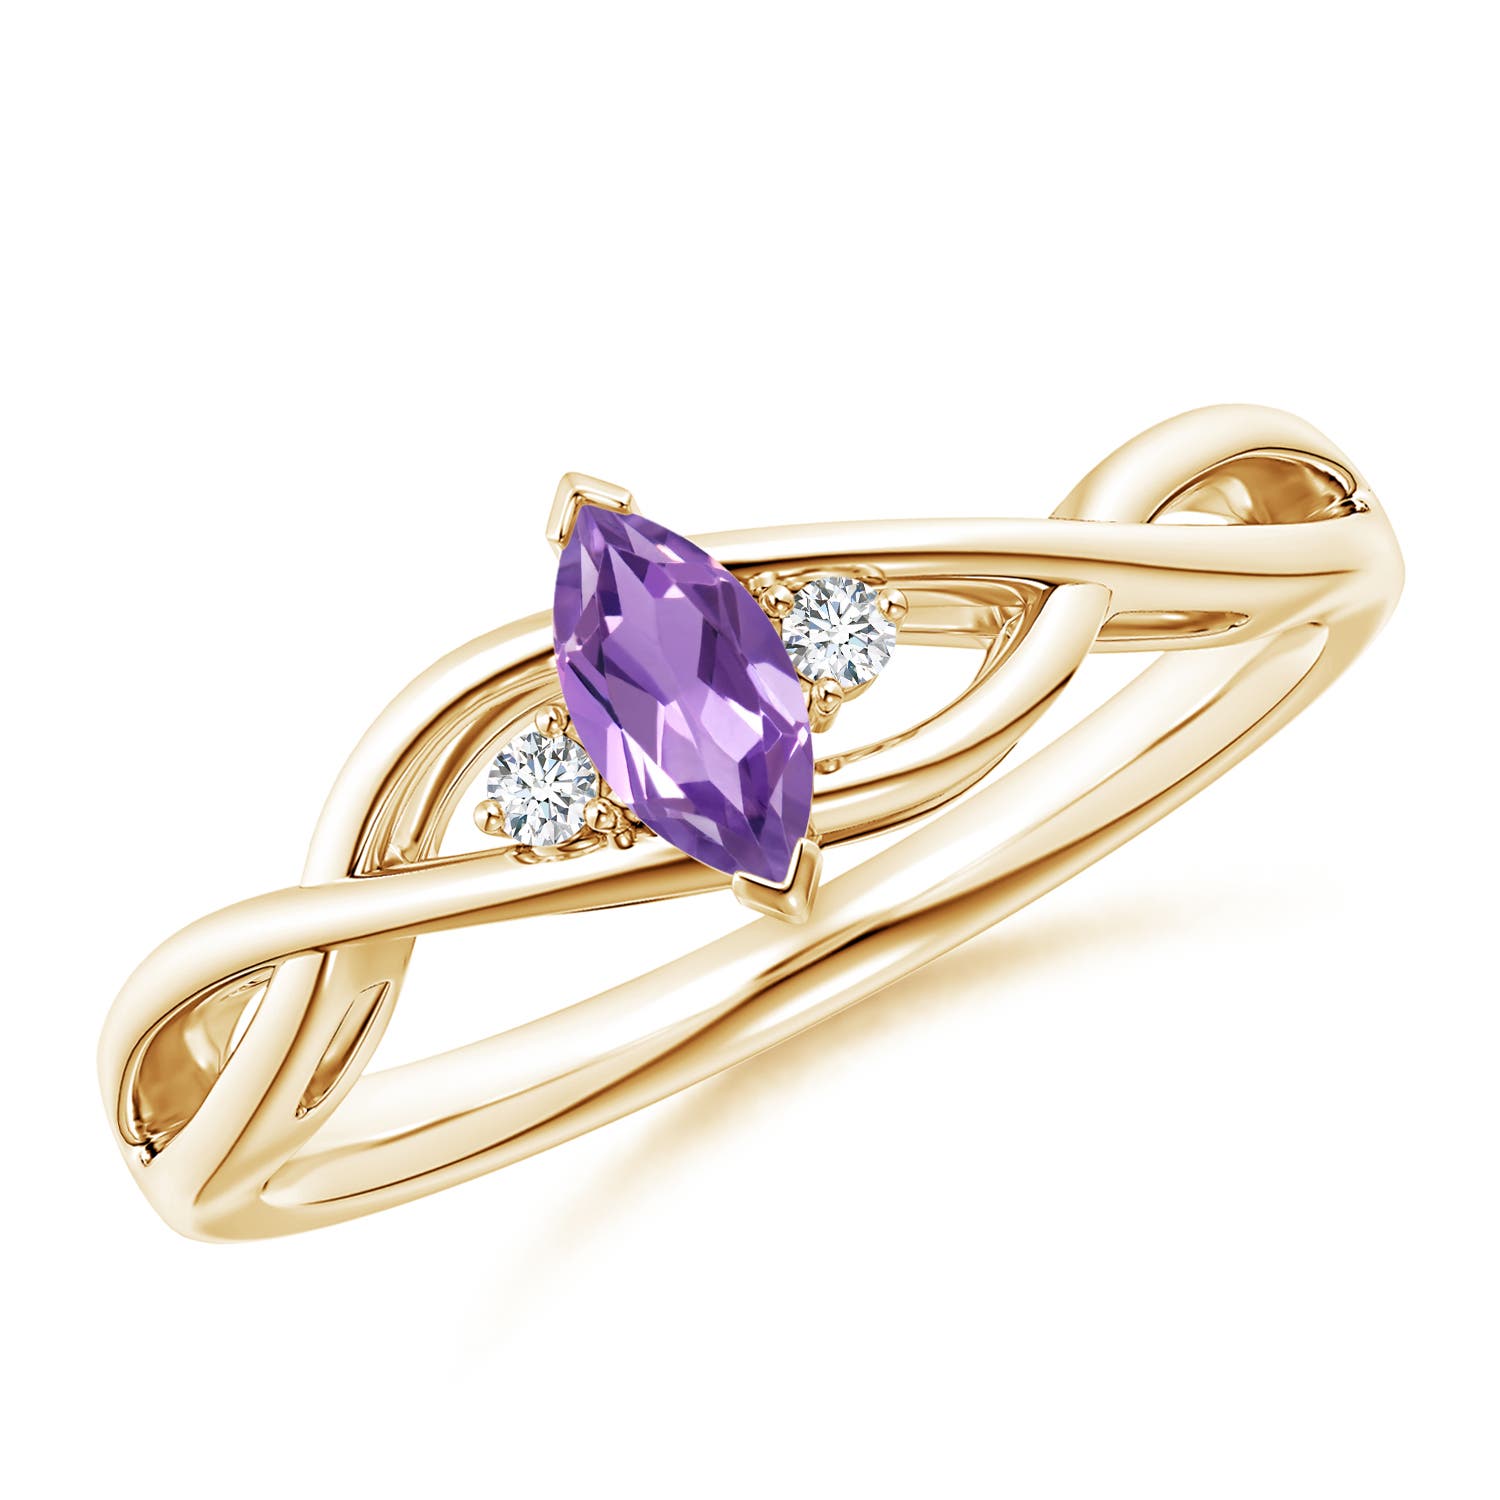 A - Amethyst / 0.23 CT / 14 KT Yellow Gold